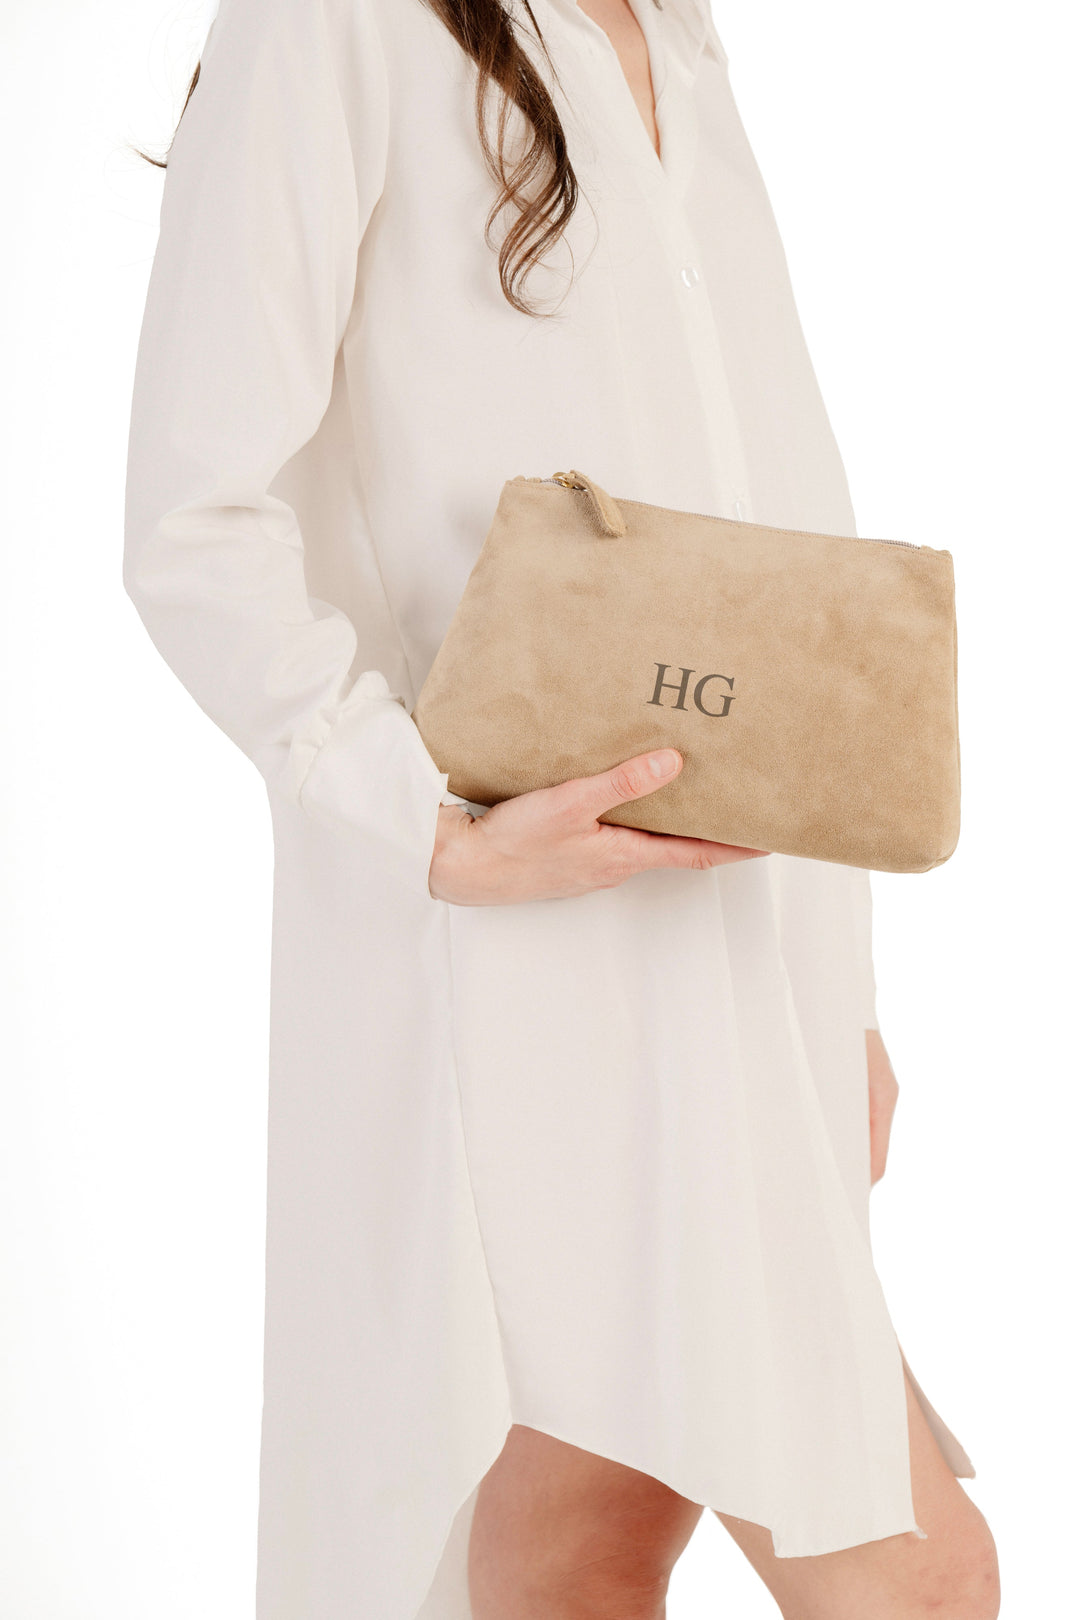 Woman holding a beige suede clutch with HG initials while wearing a white dress